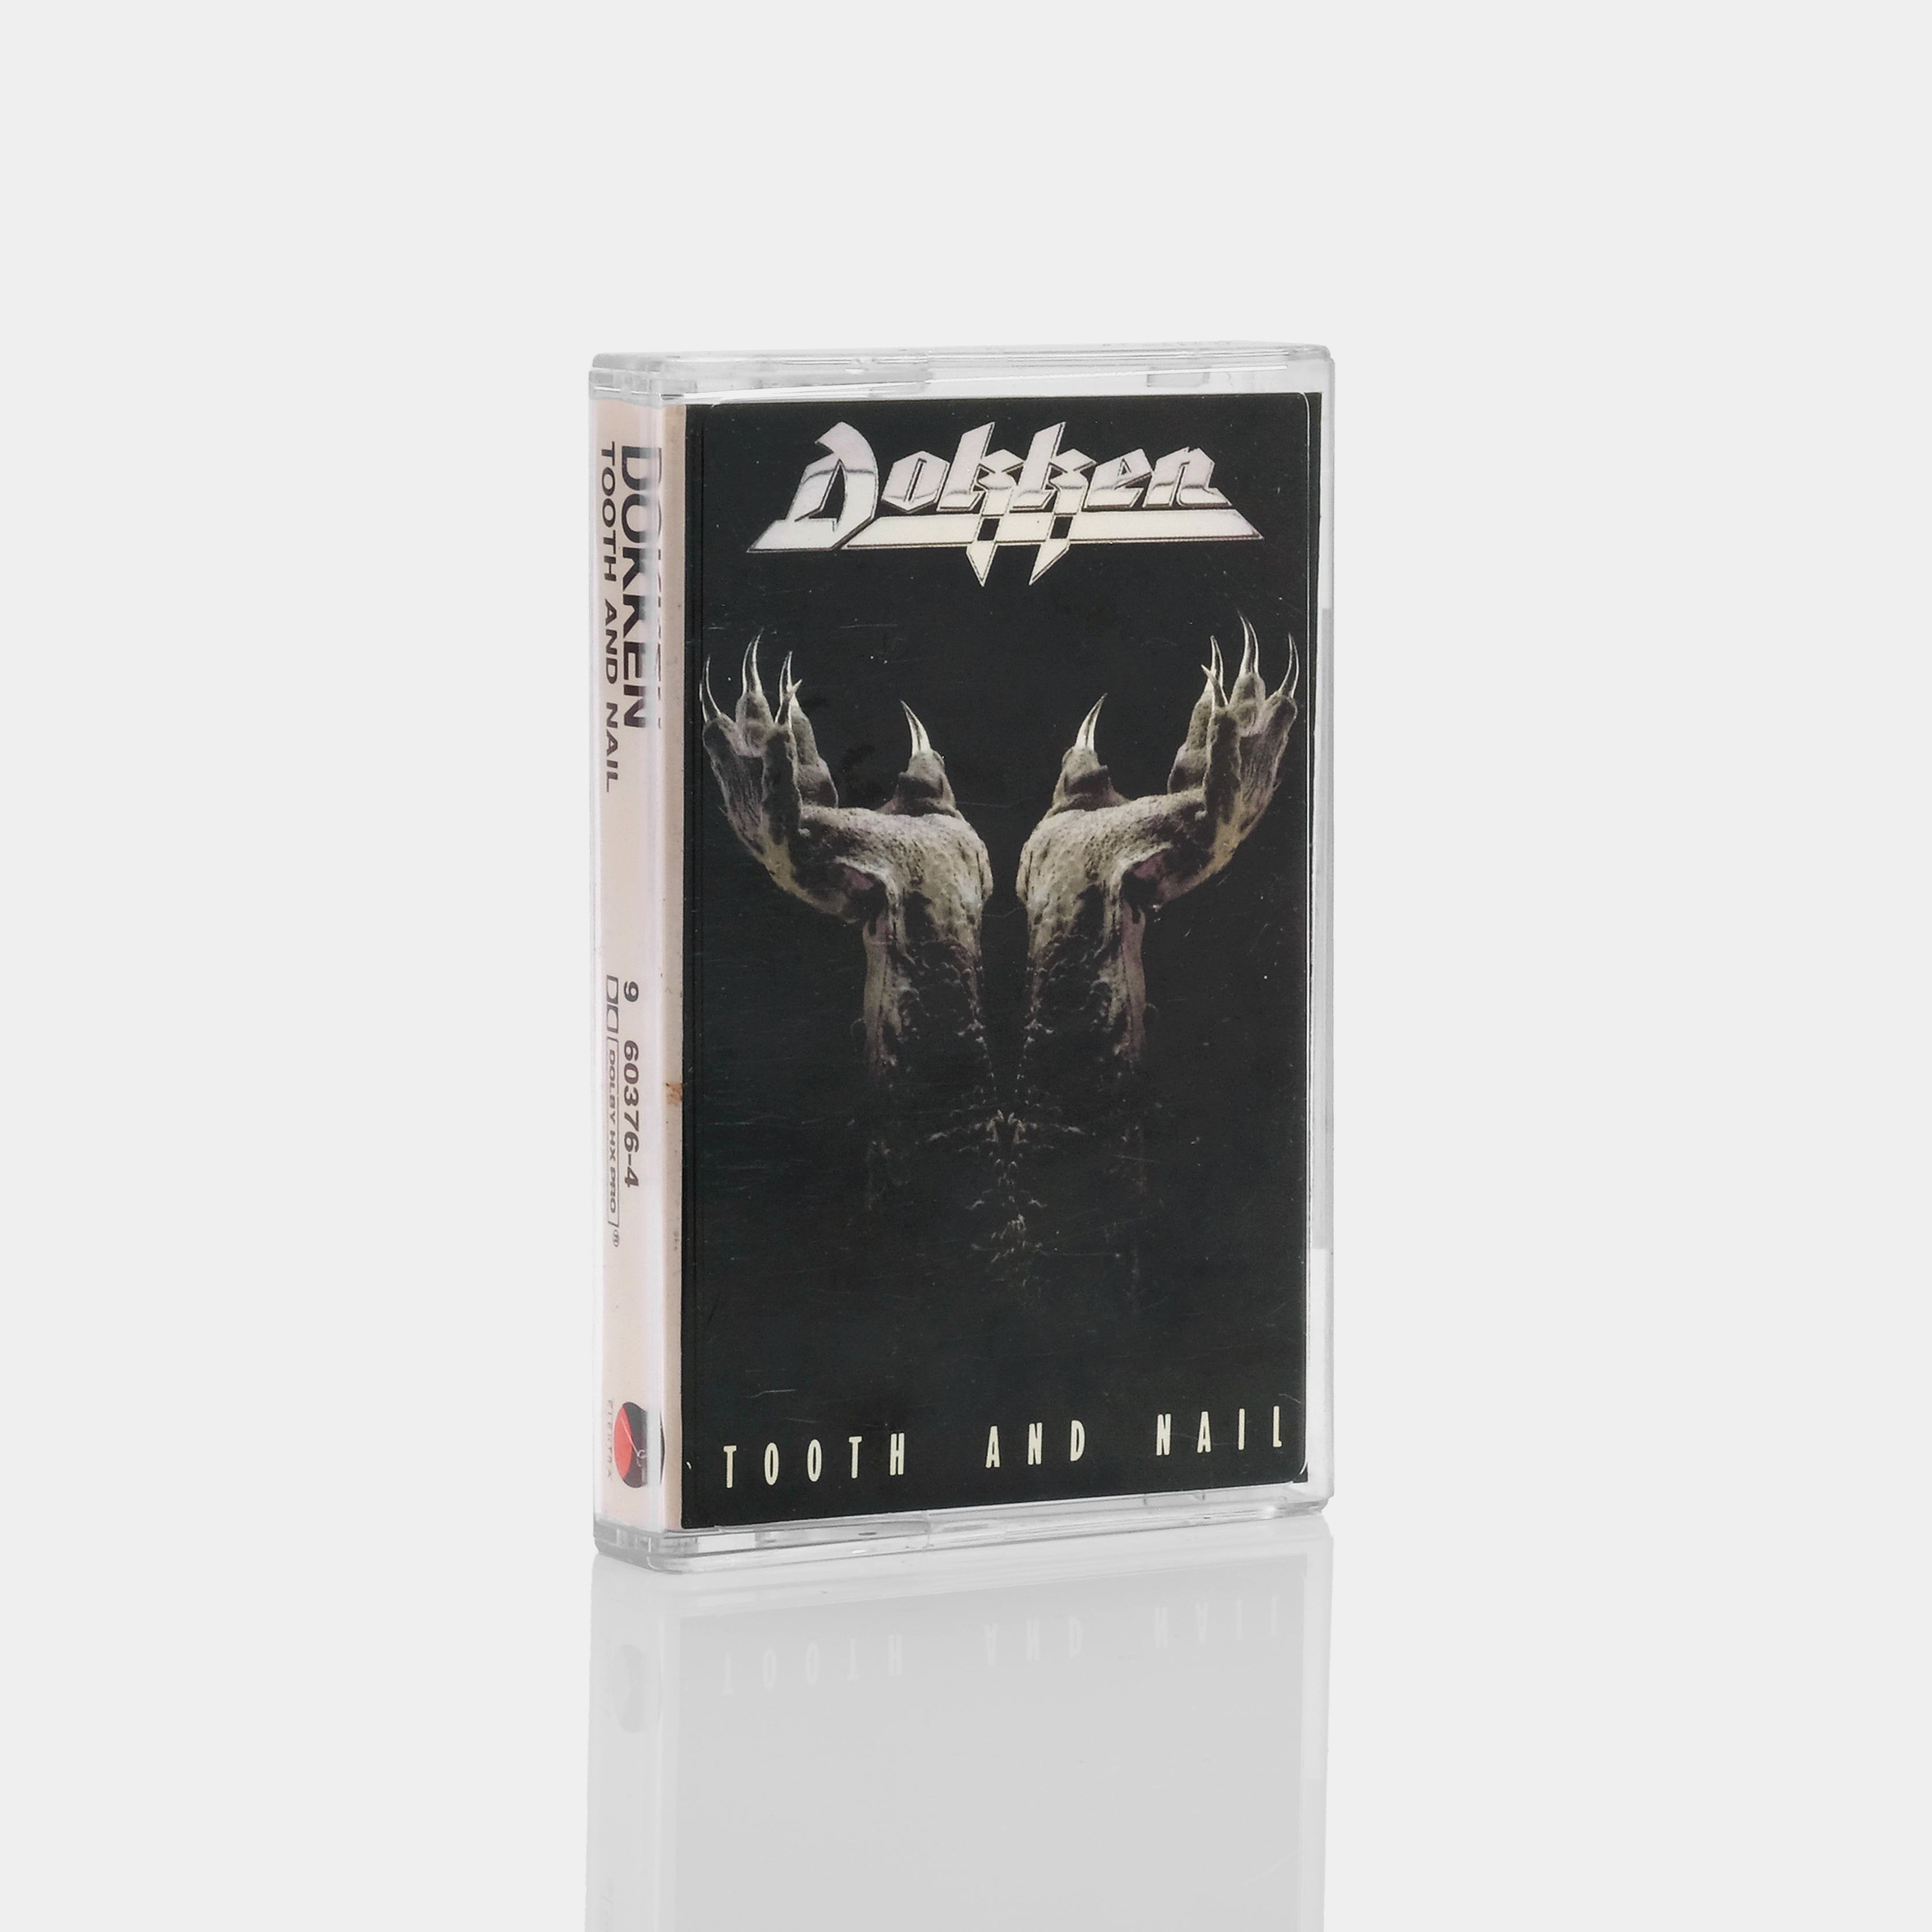 Dokken - Tooth And Nail Cassette Tape